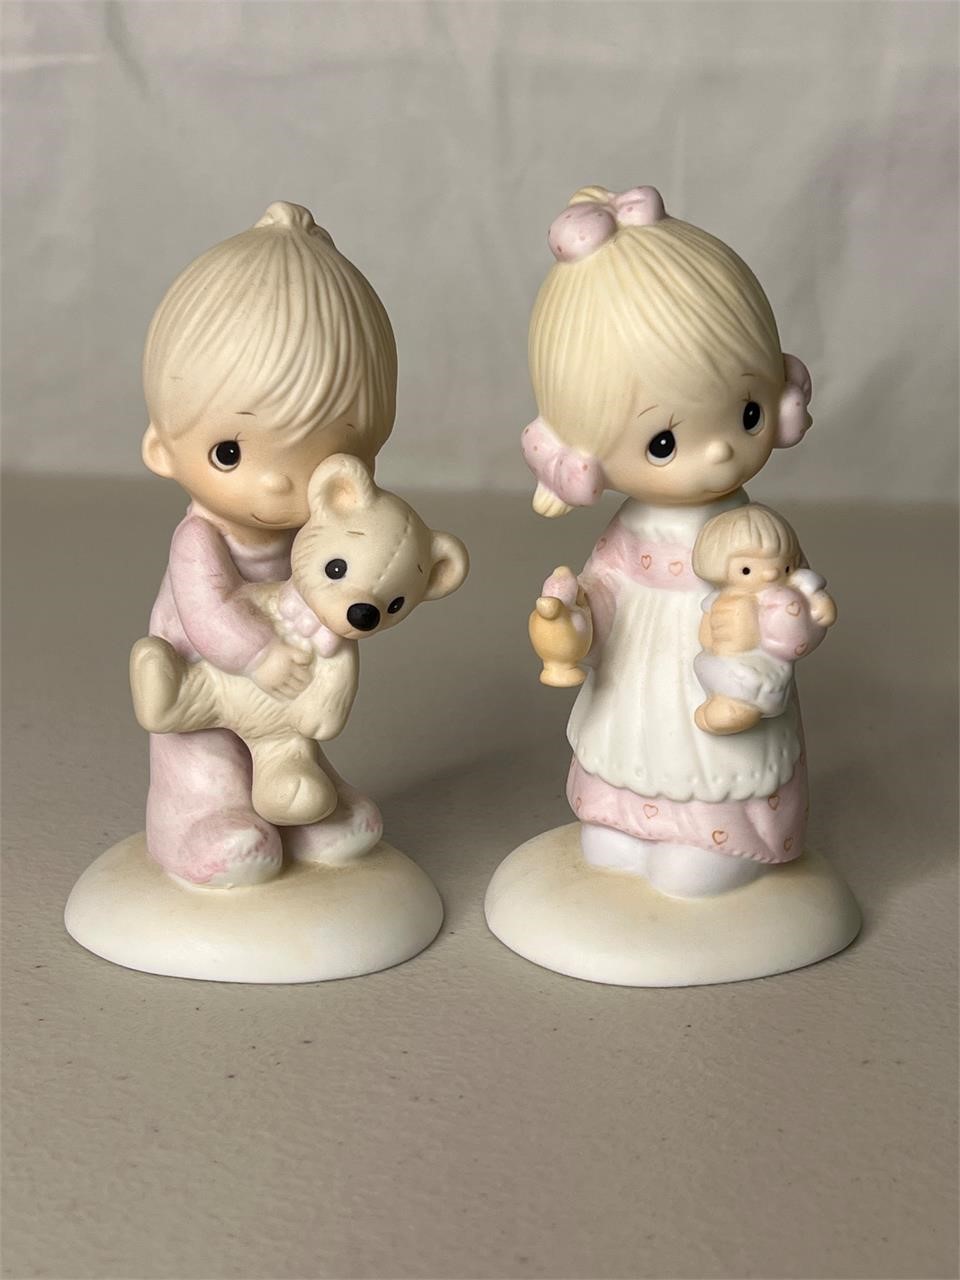 Two Precious Moments Figurines